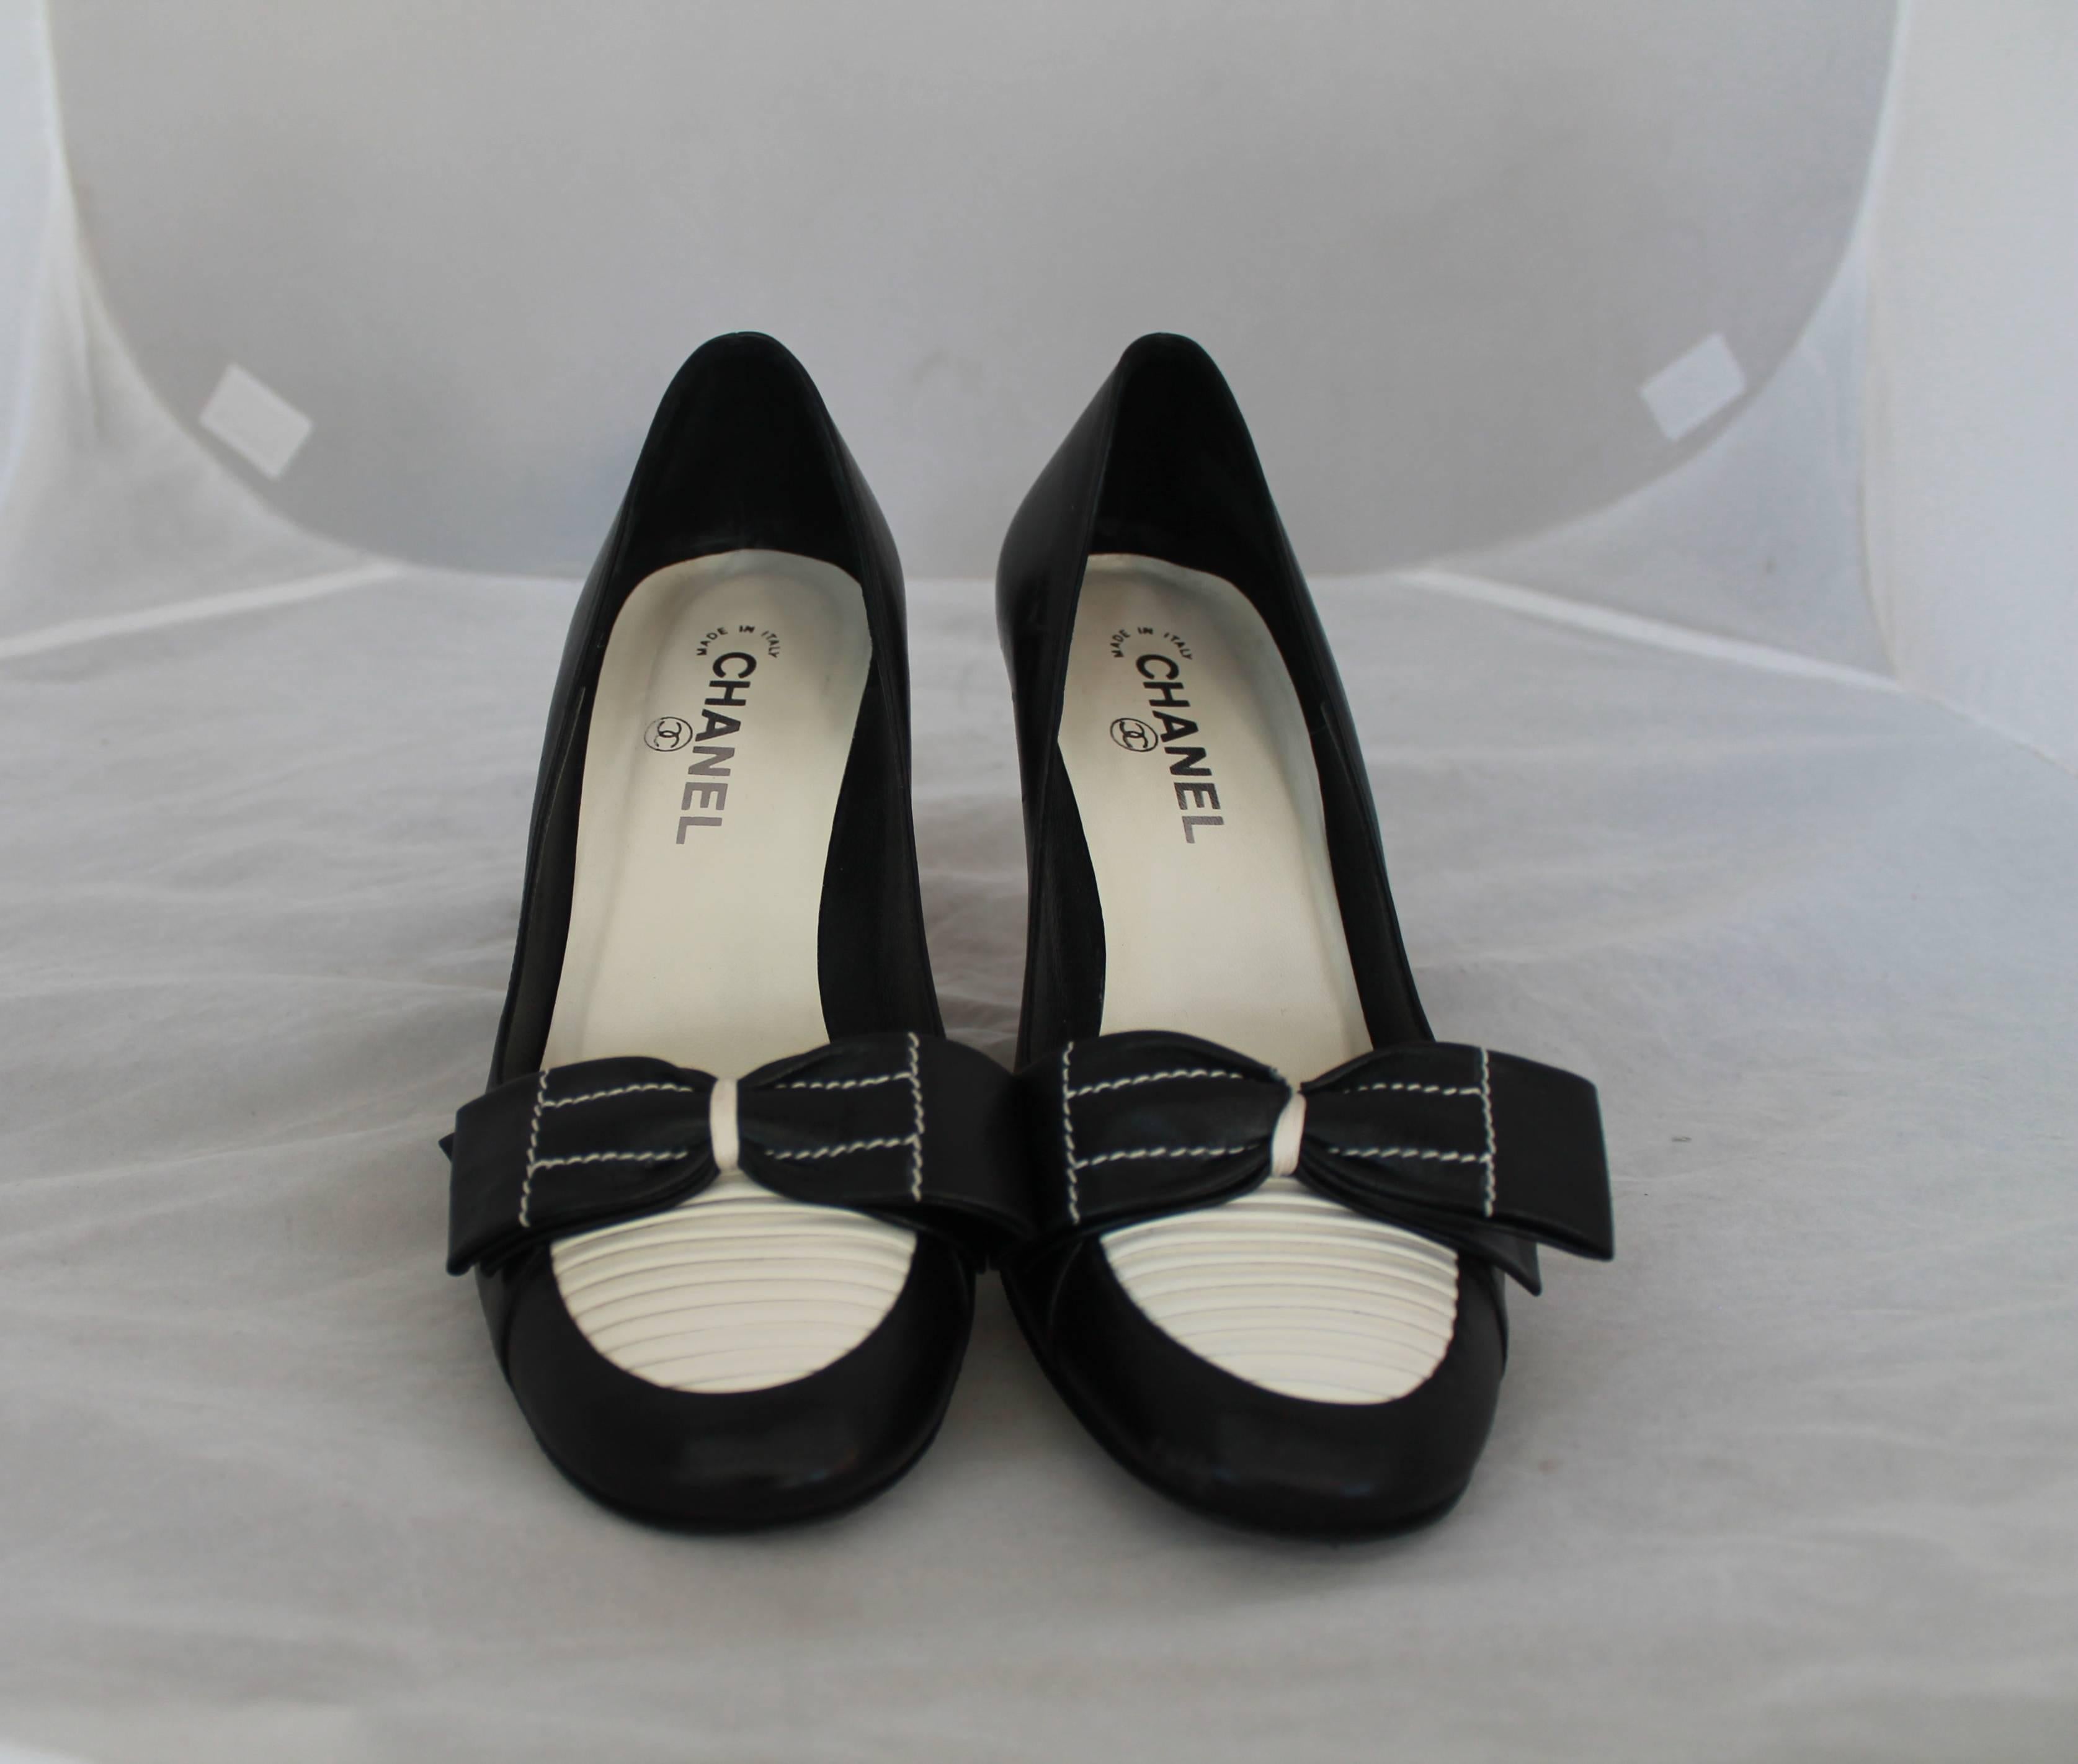 Chanel Black & Ivory Leather Loafer Style Pumps - 39.5.  These beautiful pumps are in excellent condition with visible bottom wear, but minimal outside wear.  They have front pleating and a large bow with white stitching as shown in Image